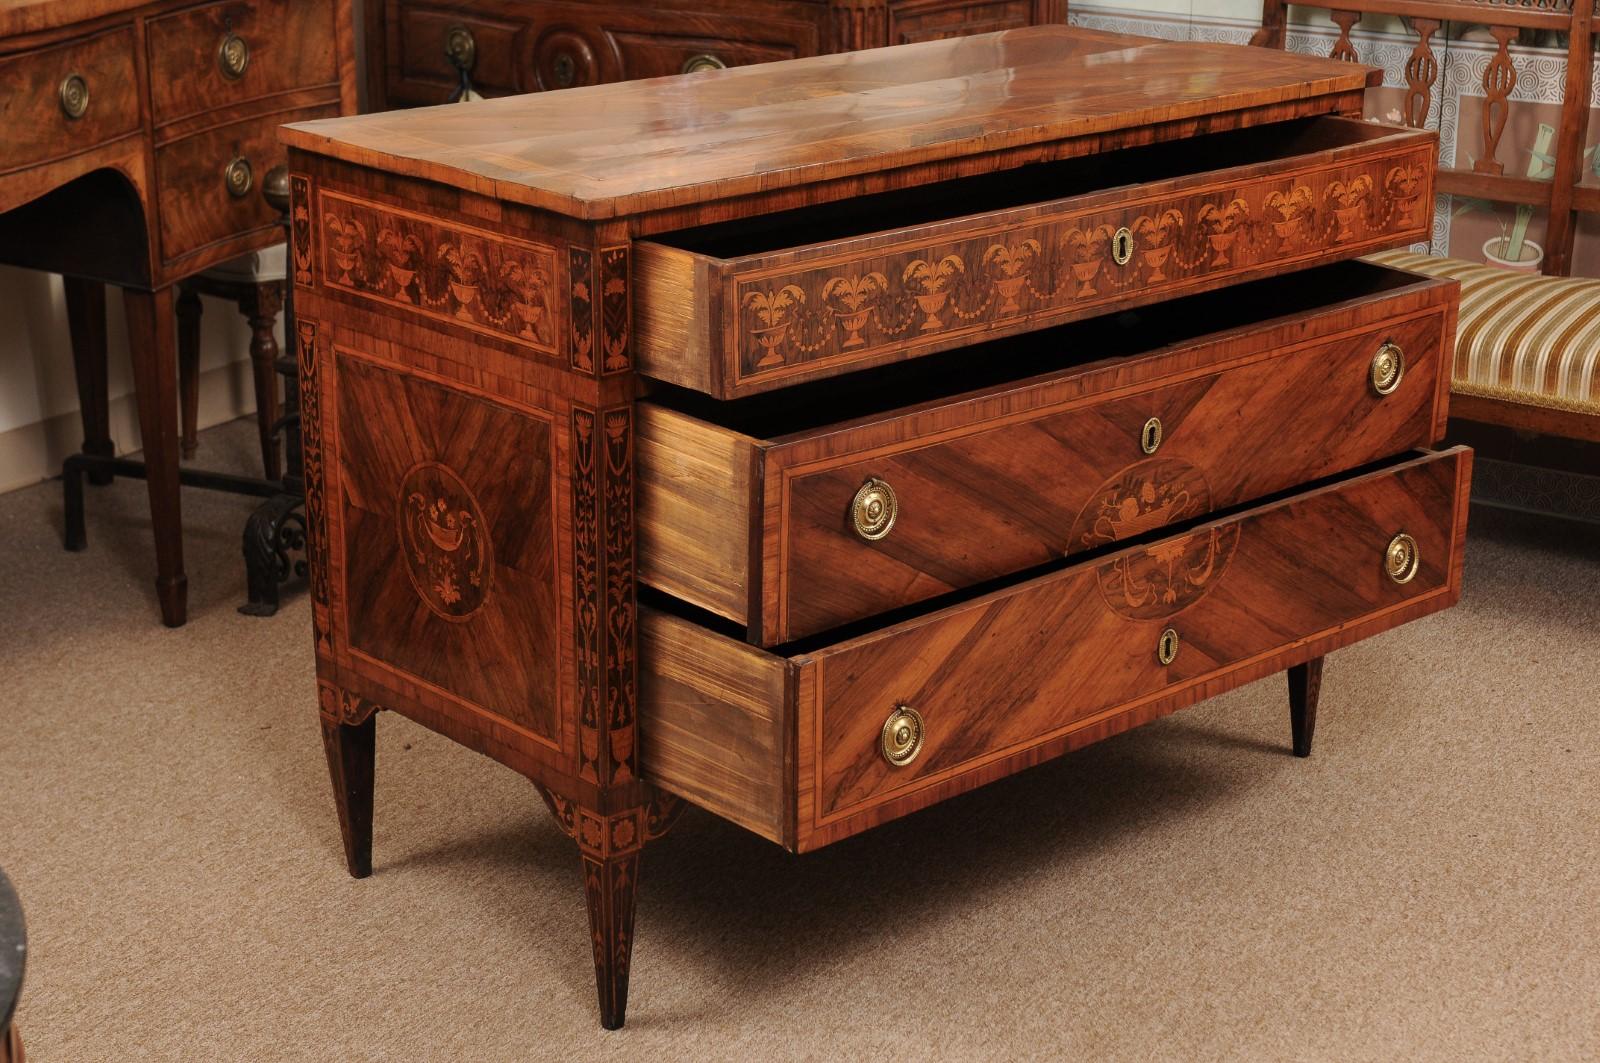 The pair of Northern Italian neoclassical inlaid commodes in tulipwood, rosewood and fruitwood featuring urn and foliate marquetry, cross-banding and string inlay. The commode with 3 drawers and square tapering legs.